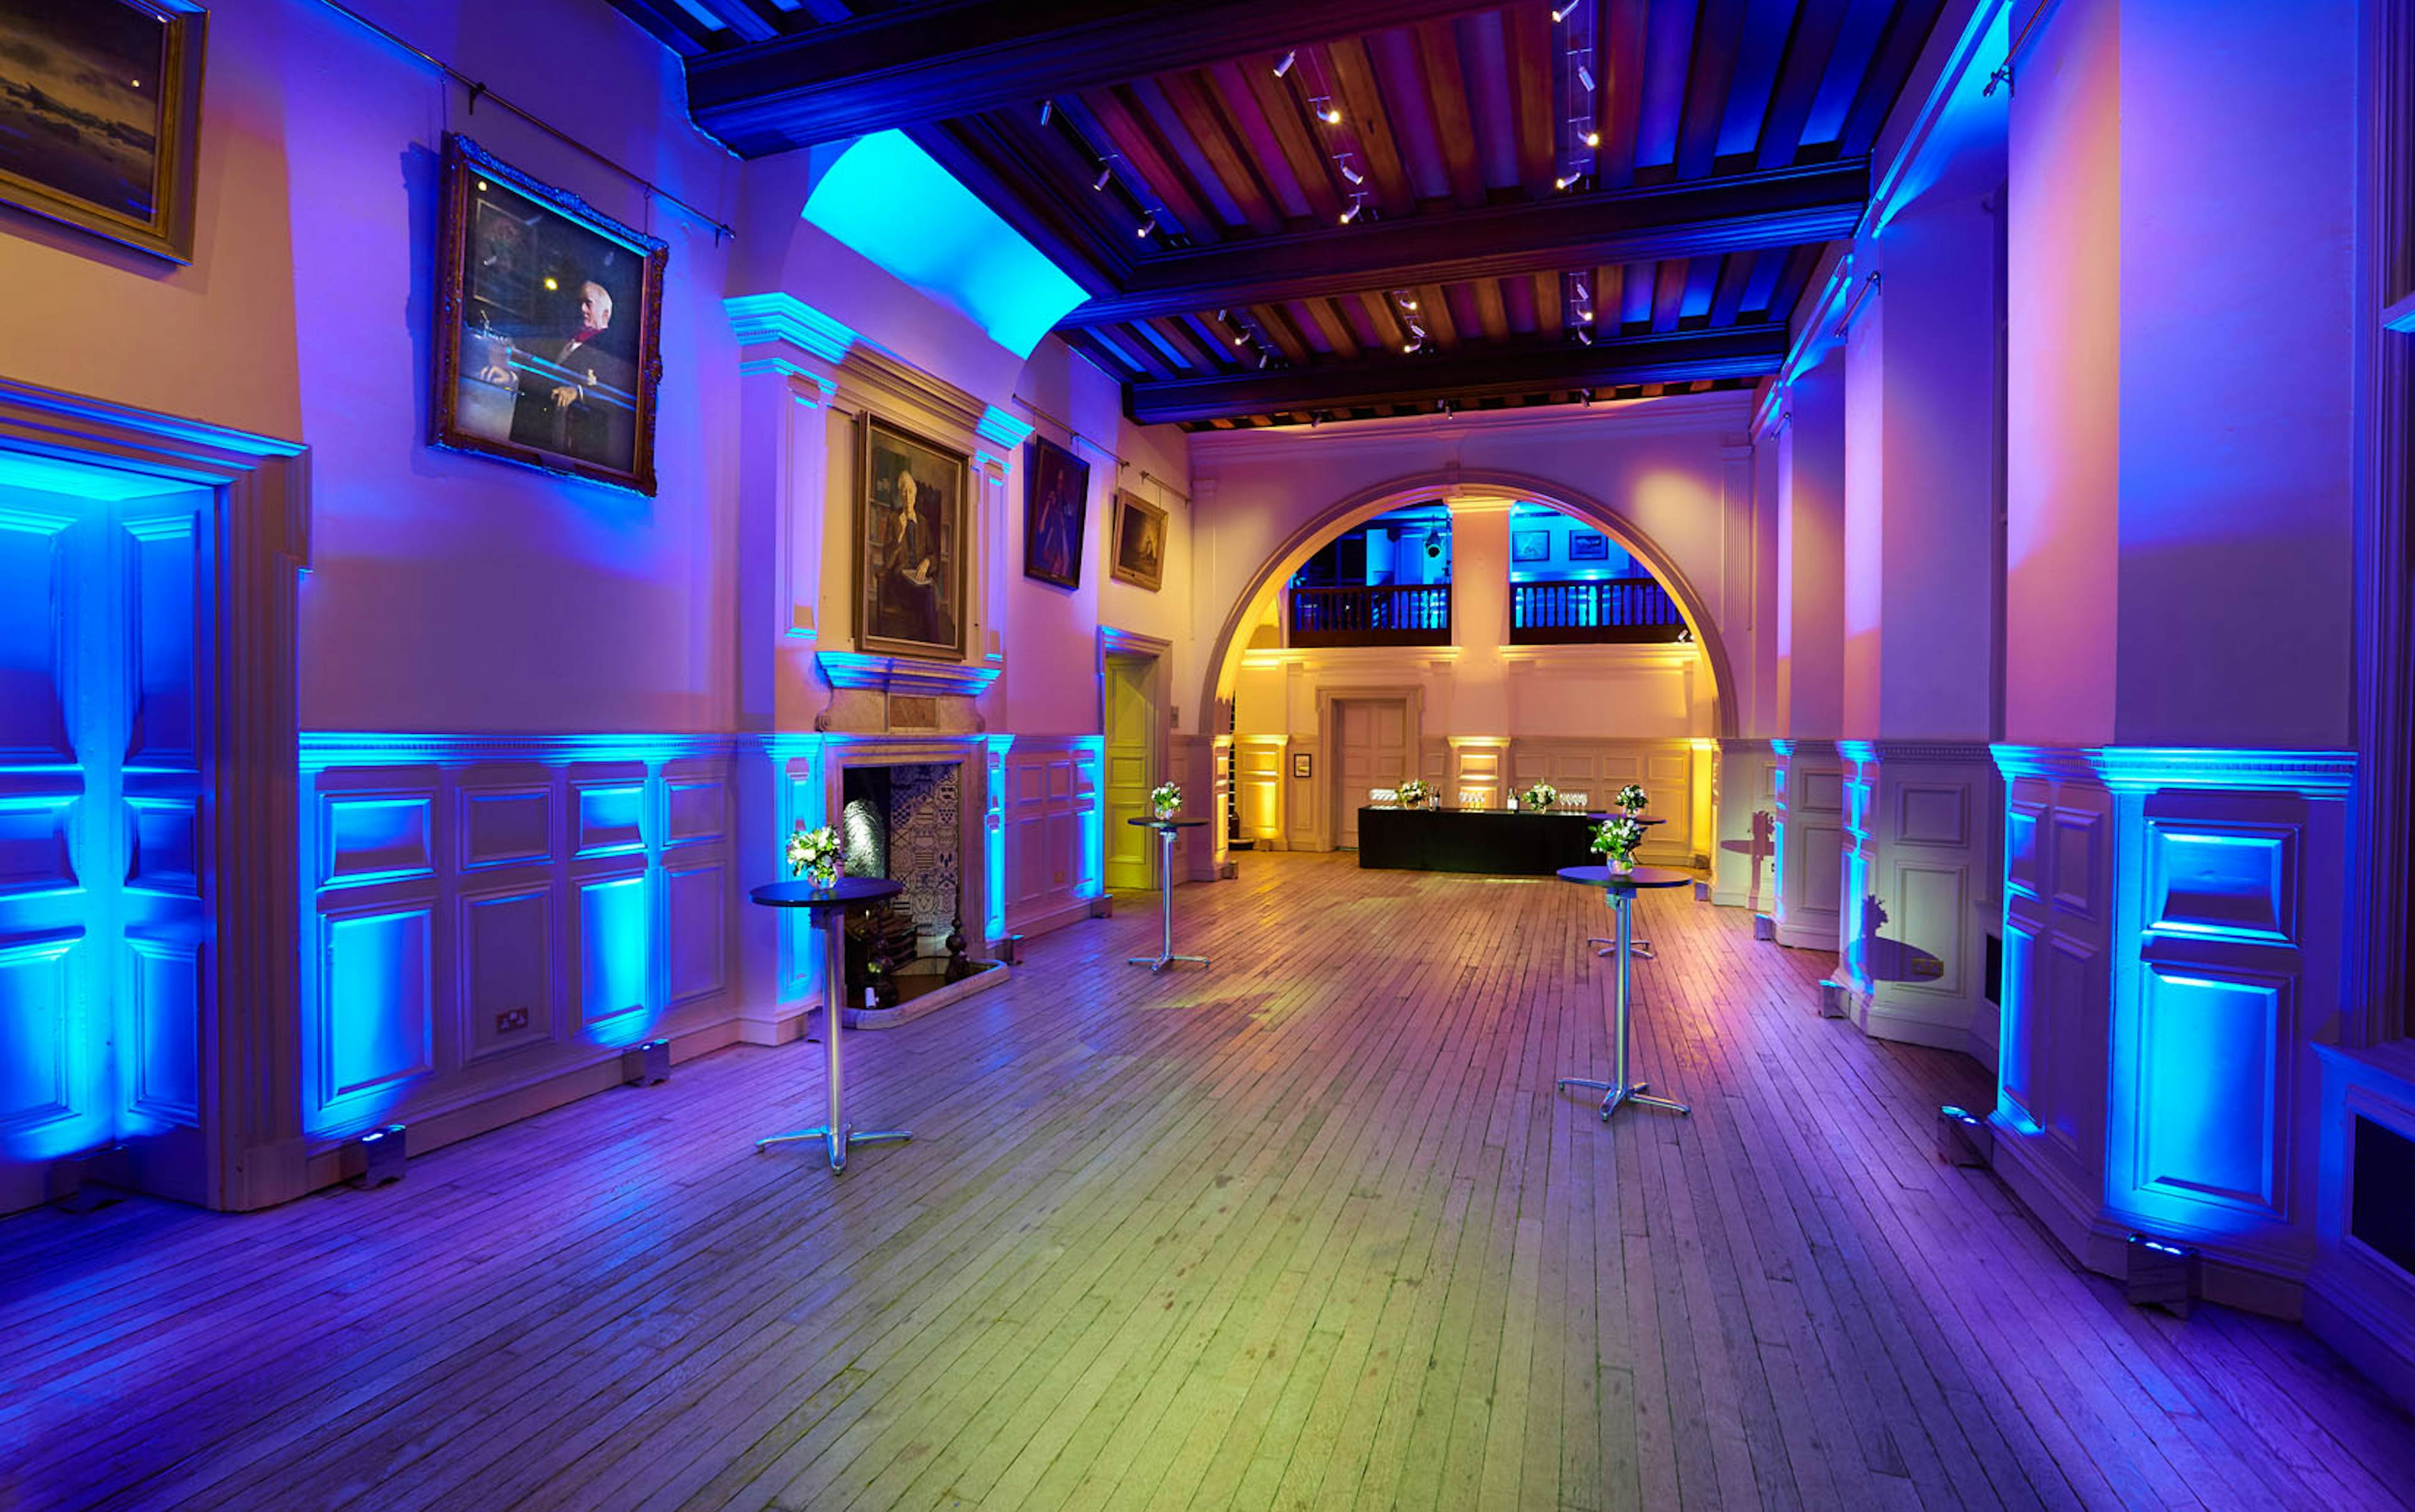 Royal Geographical Society - Main Hall & Education Centre image 1